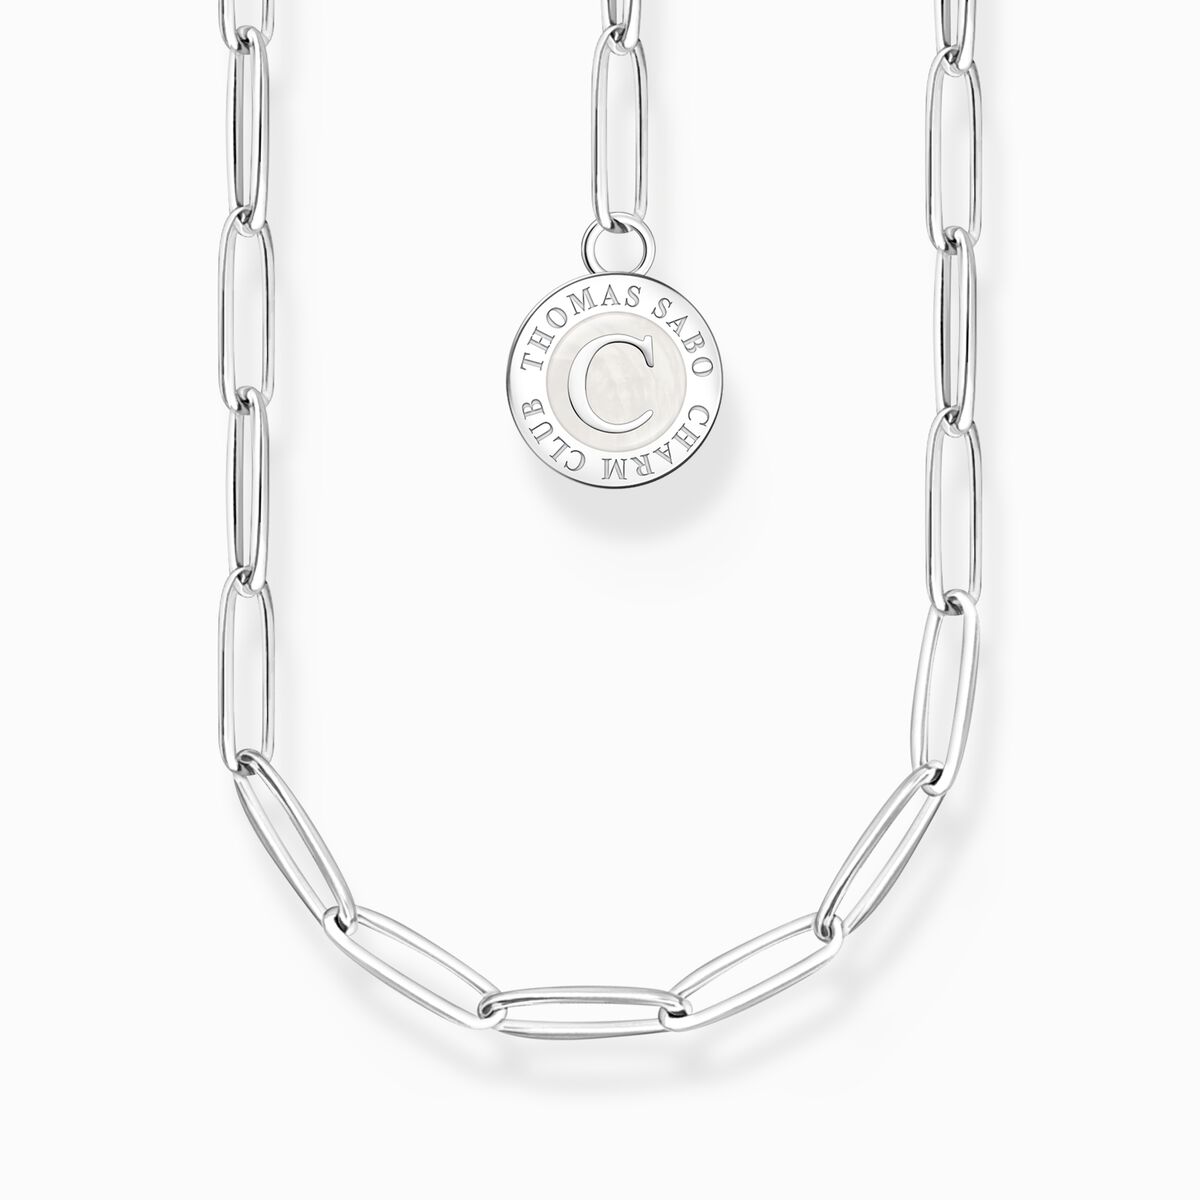 THOMAS Charm necklace: silver | Sterling SABO